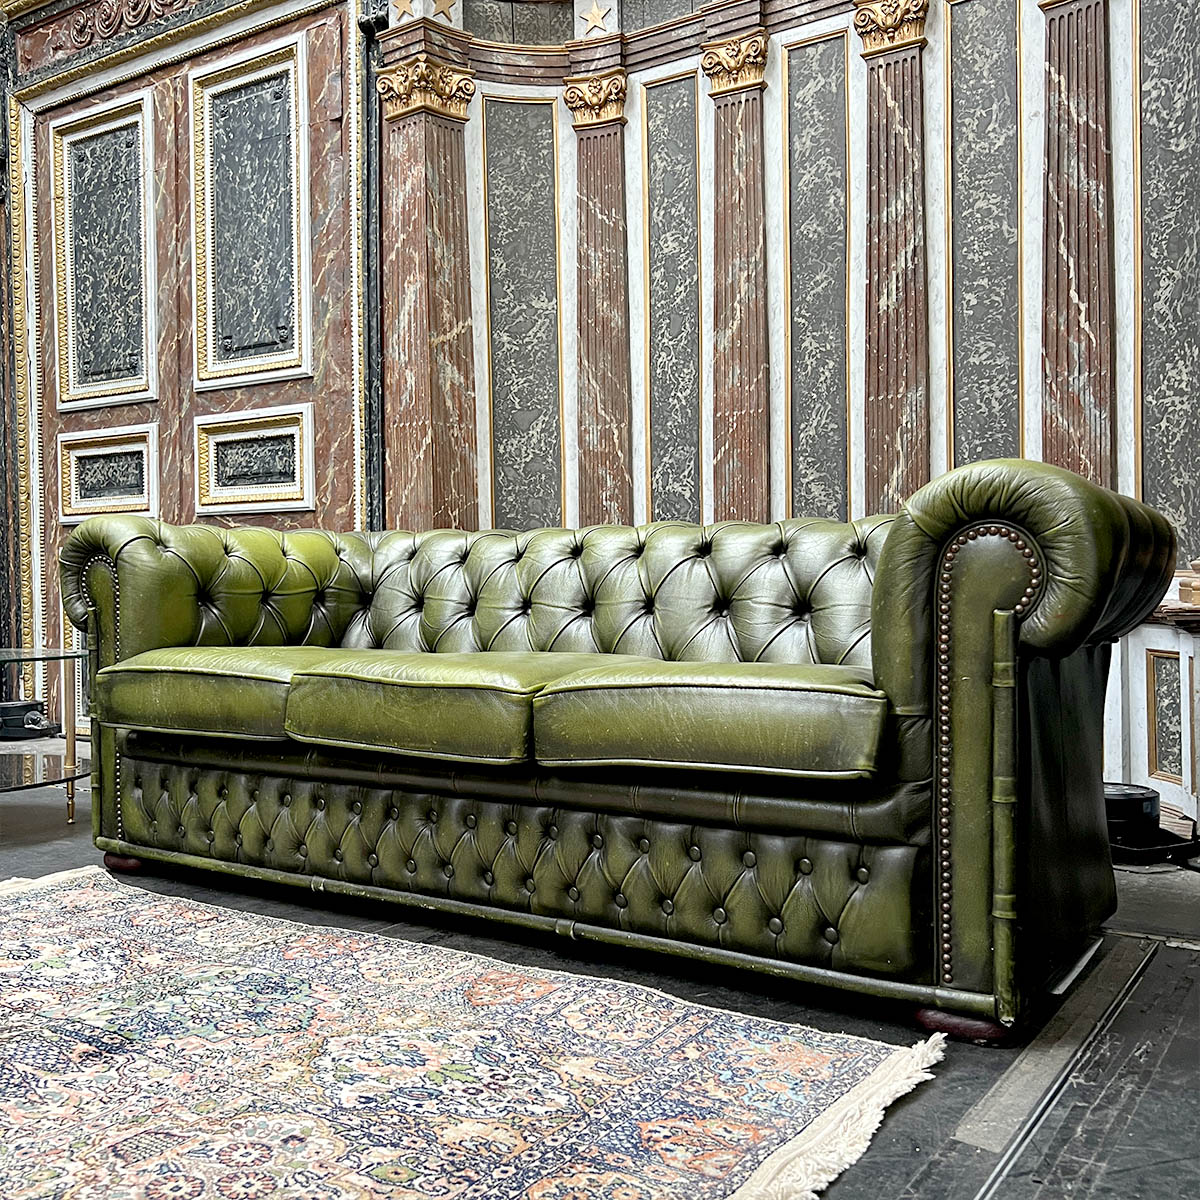 Green leather chesterfield sofa